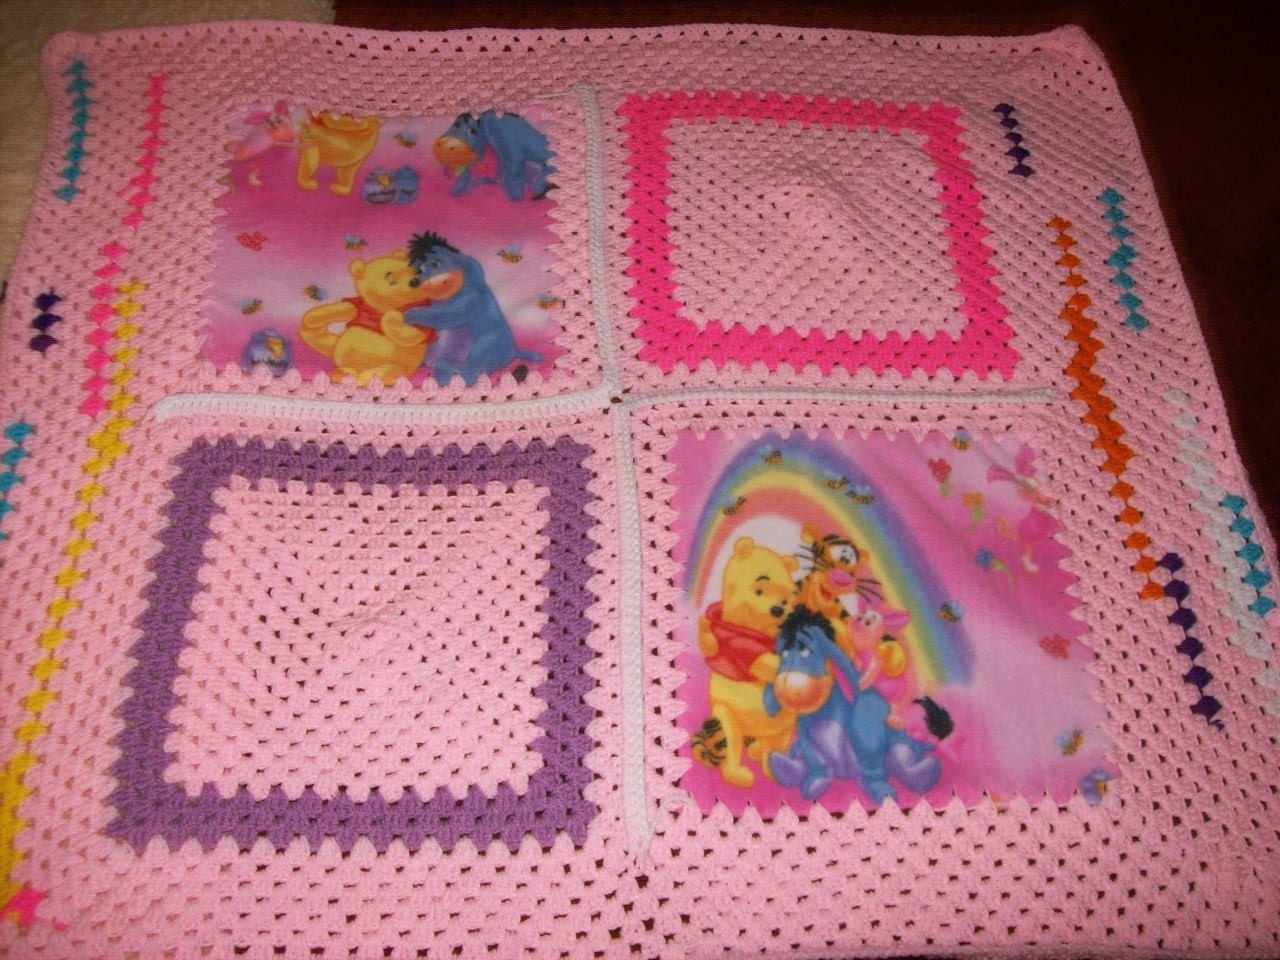 WINNIE THE POOH CROCHET PATTERN AFGHAN GRAPH E-MAILED.PDF - Crafts